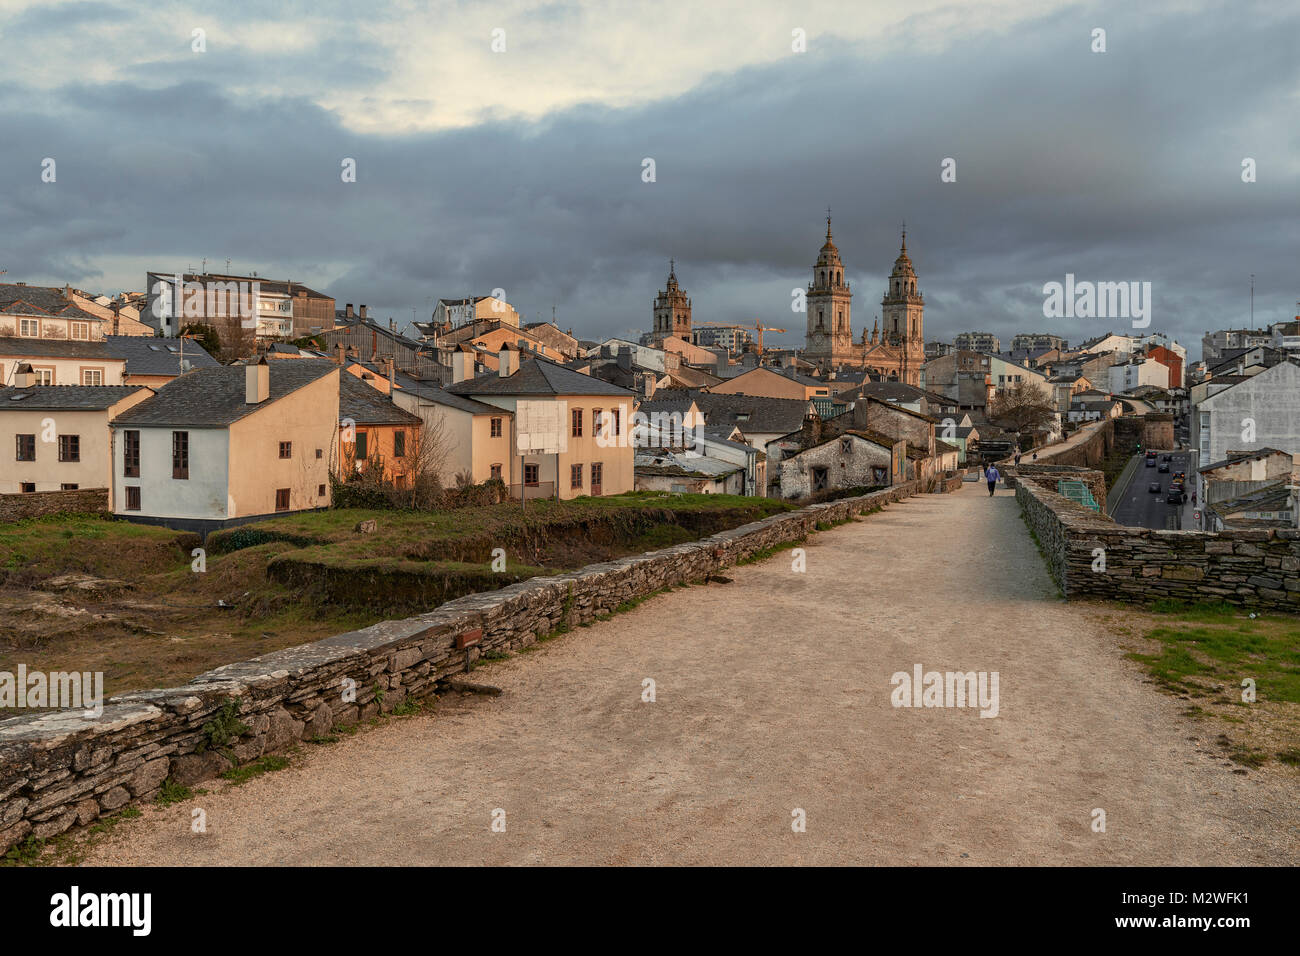 Cathedral of Santa Maria from the wall of the city of Lugo, Galicia region, Spain, illuminated in the sunset Stock Photo